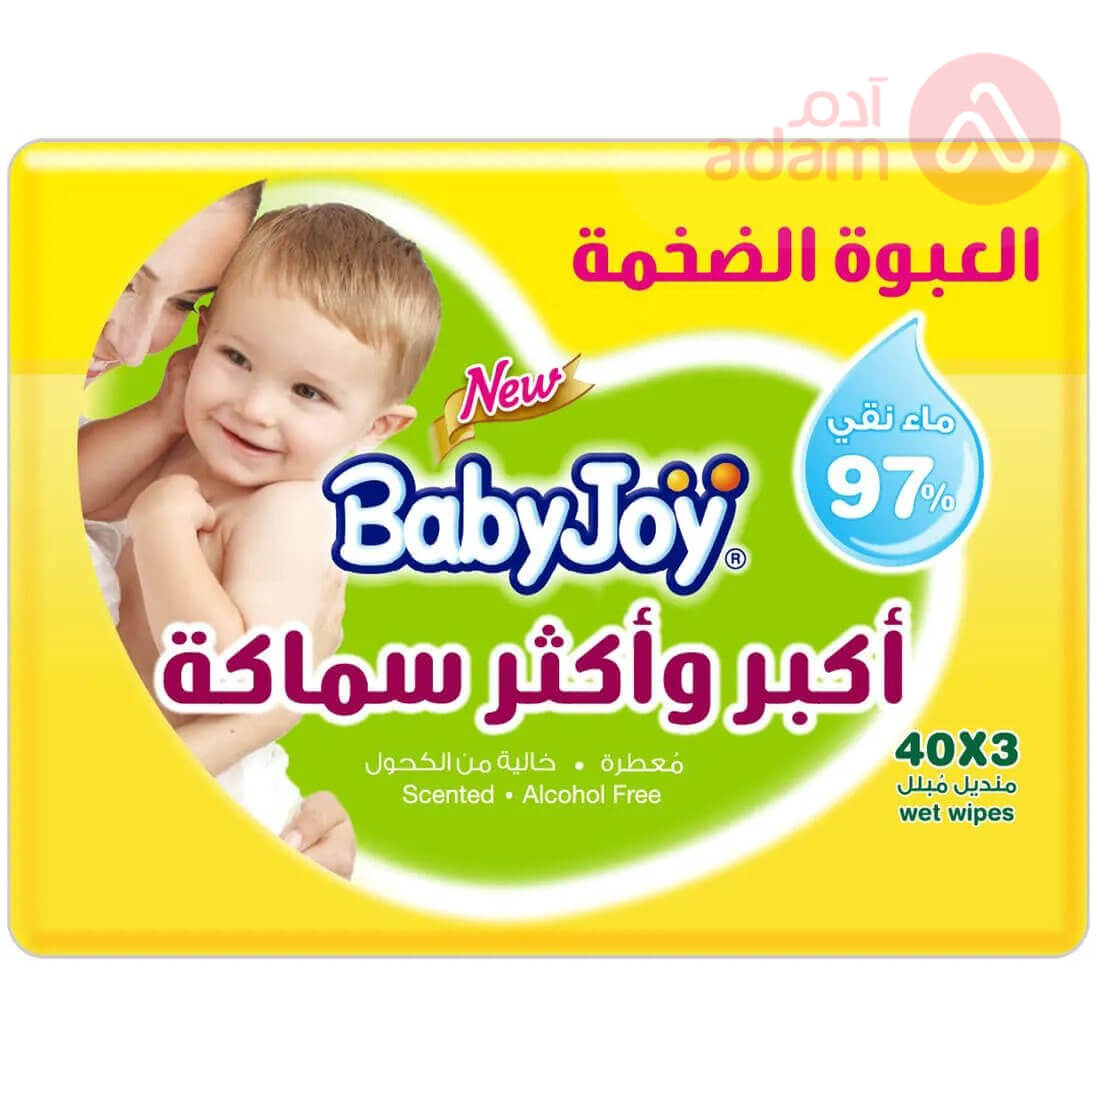 Baby Joy Baby Wipes Thicker And Large Scented 6X(3X40Pcs) Yellow